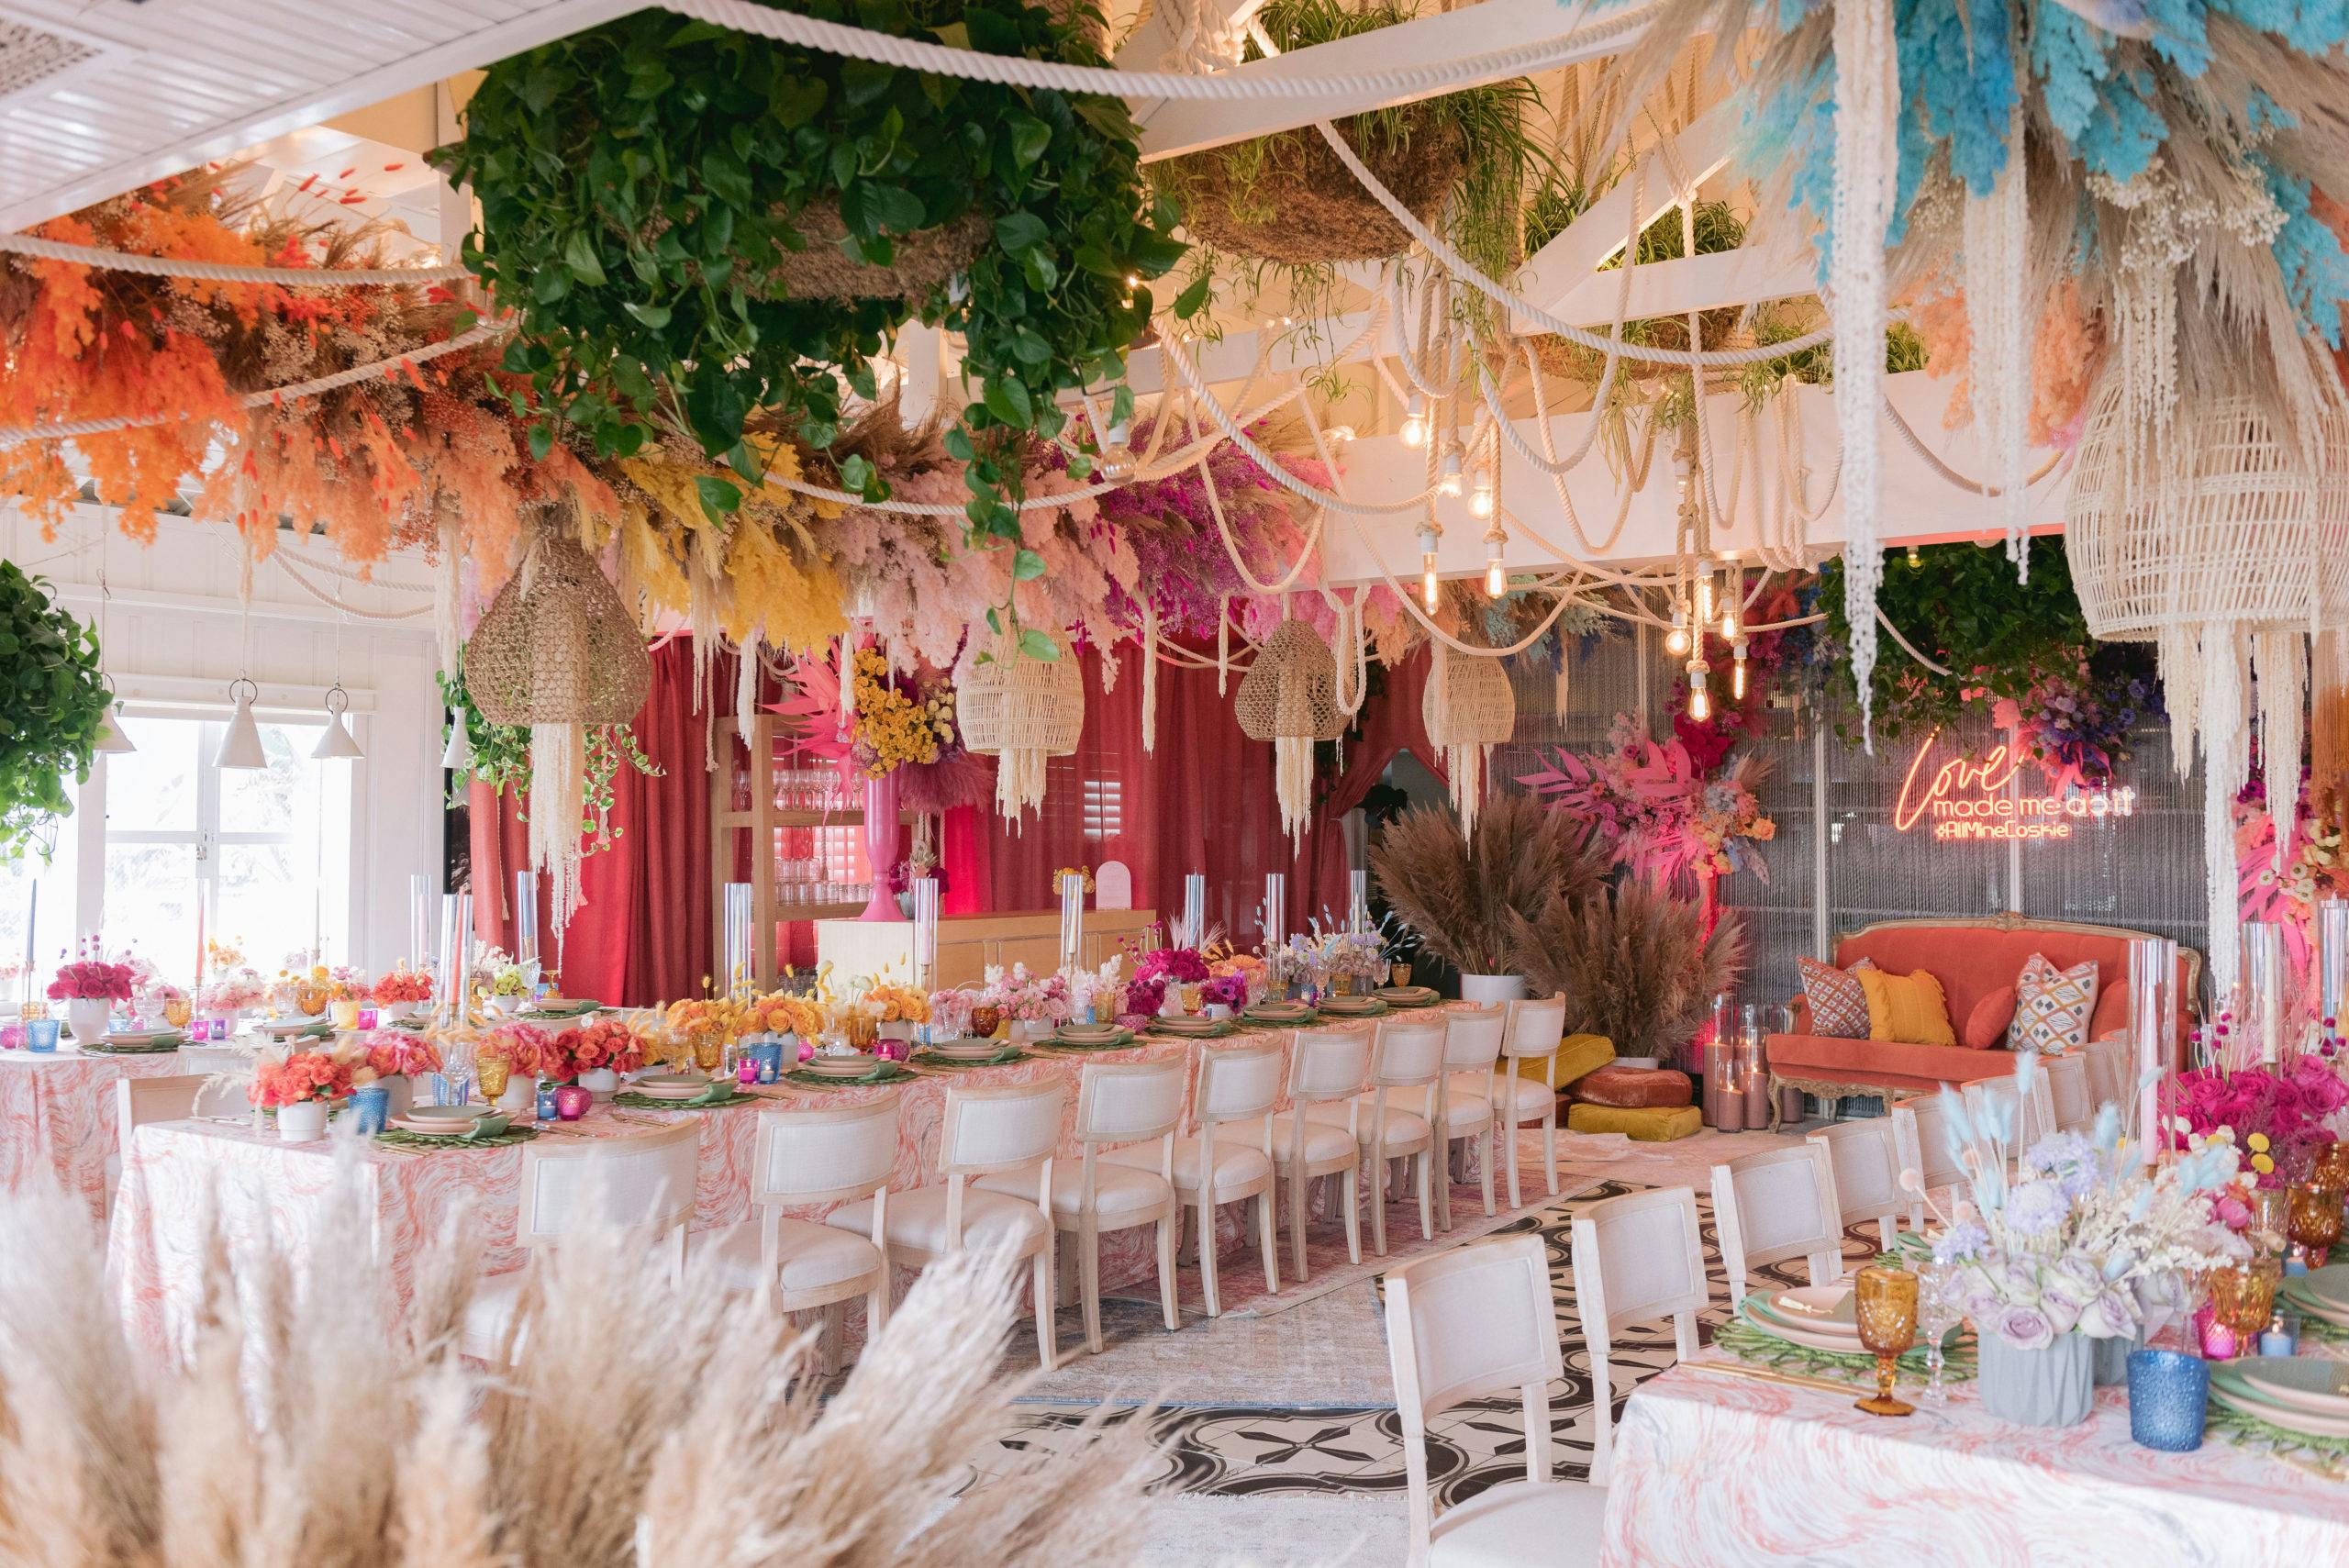 54 Engagement Party Ideas & Themes That Will Wow Guests